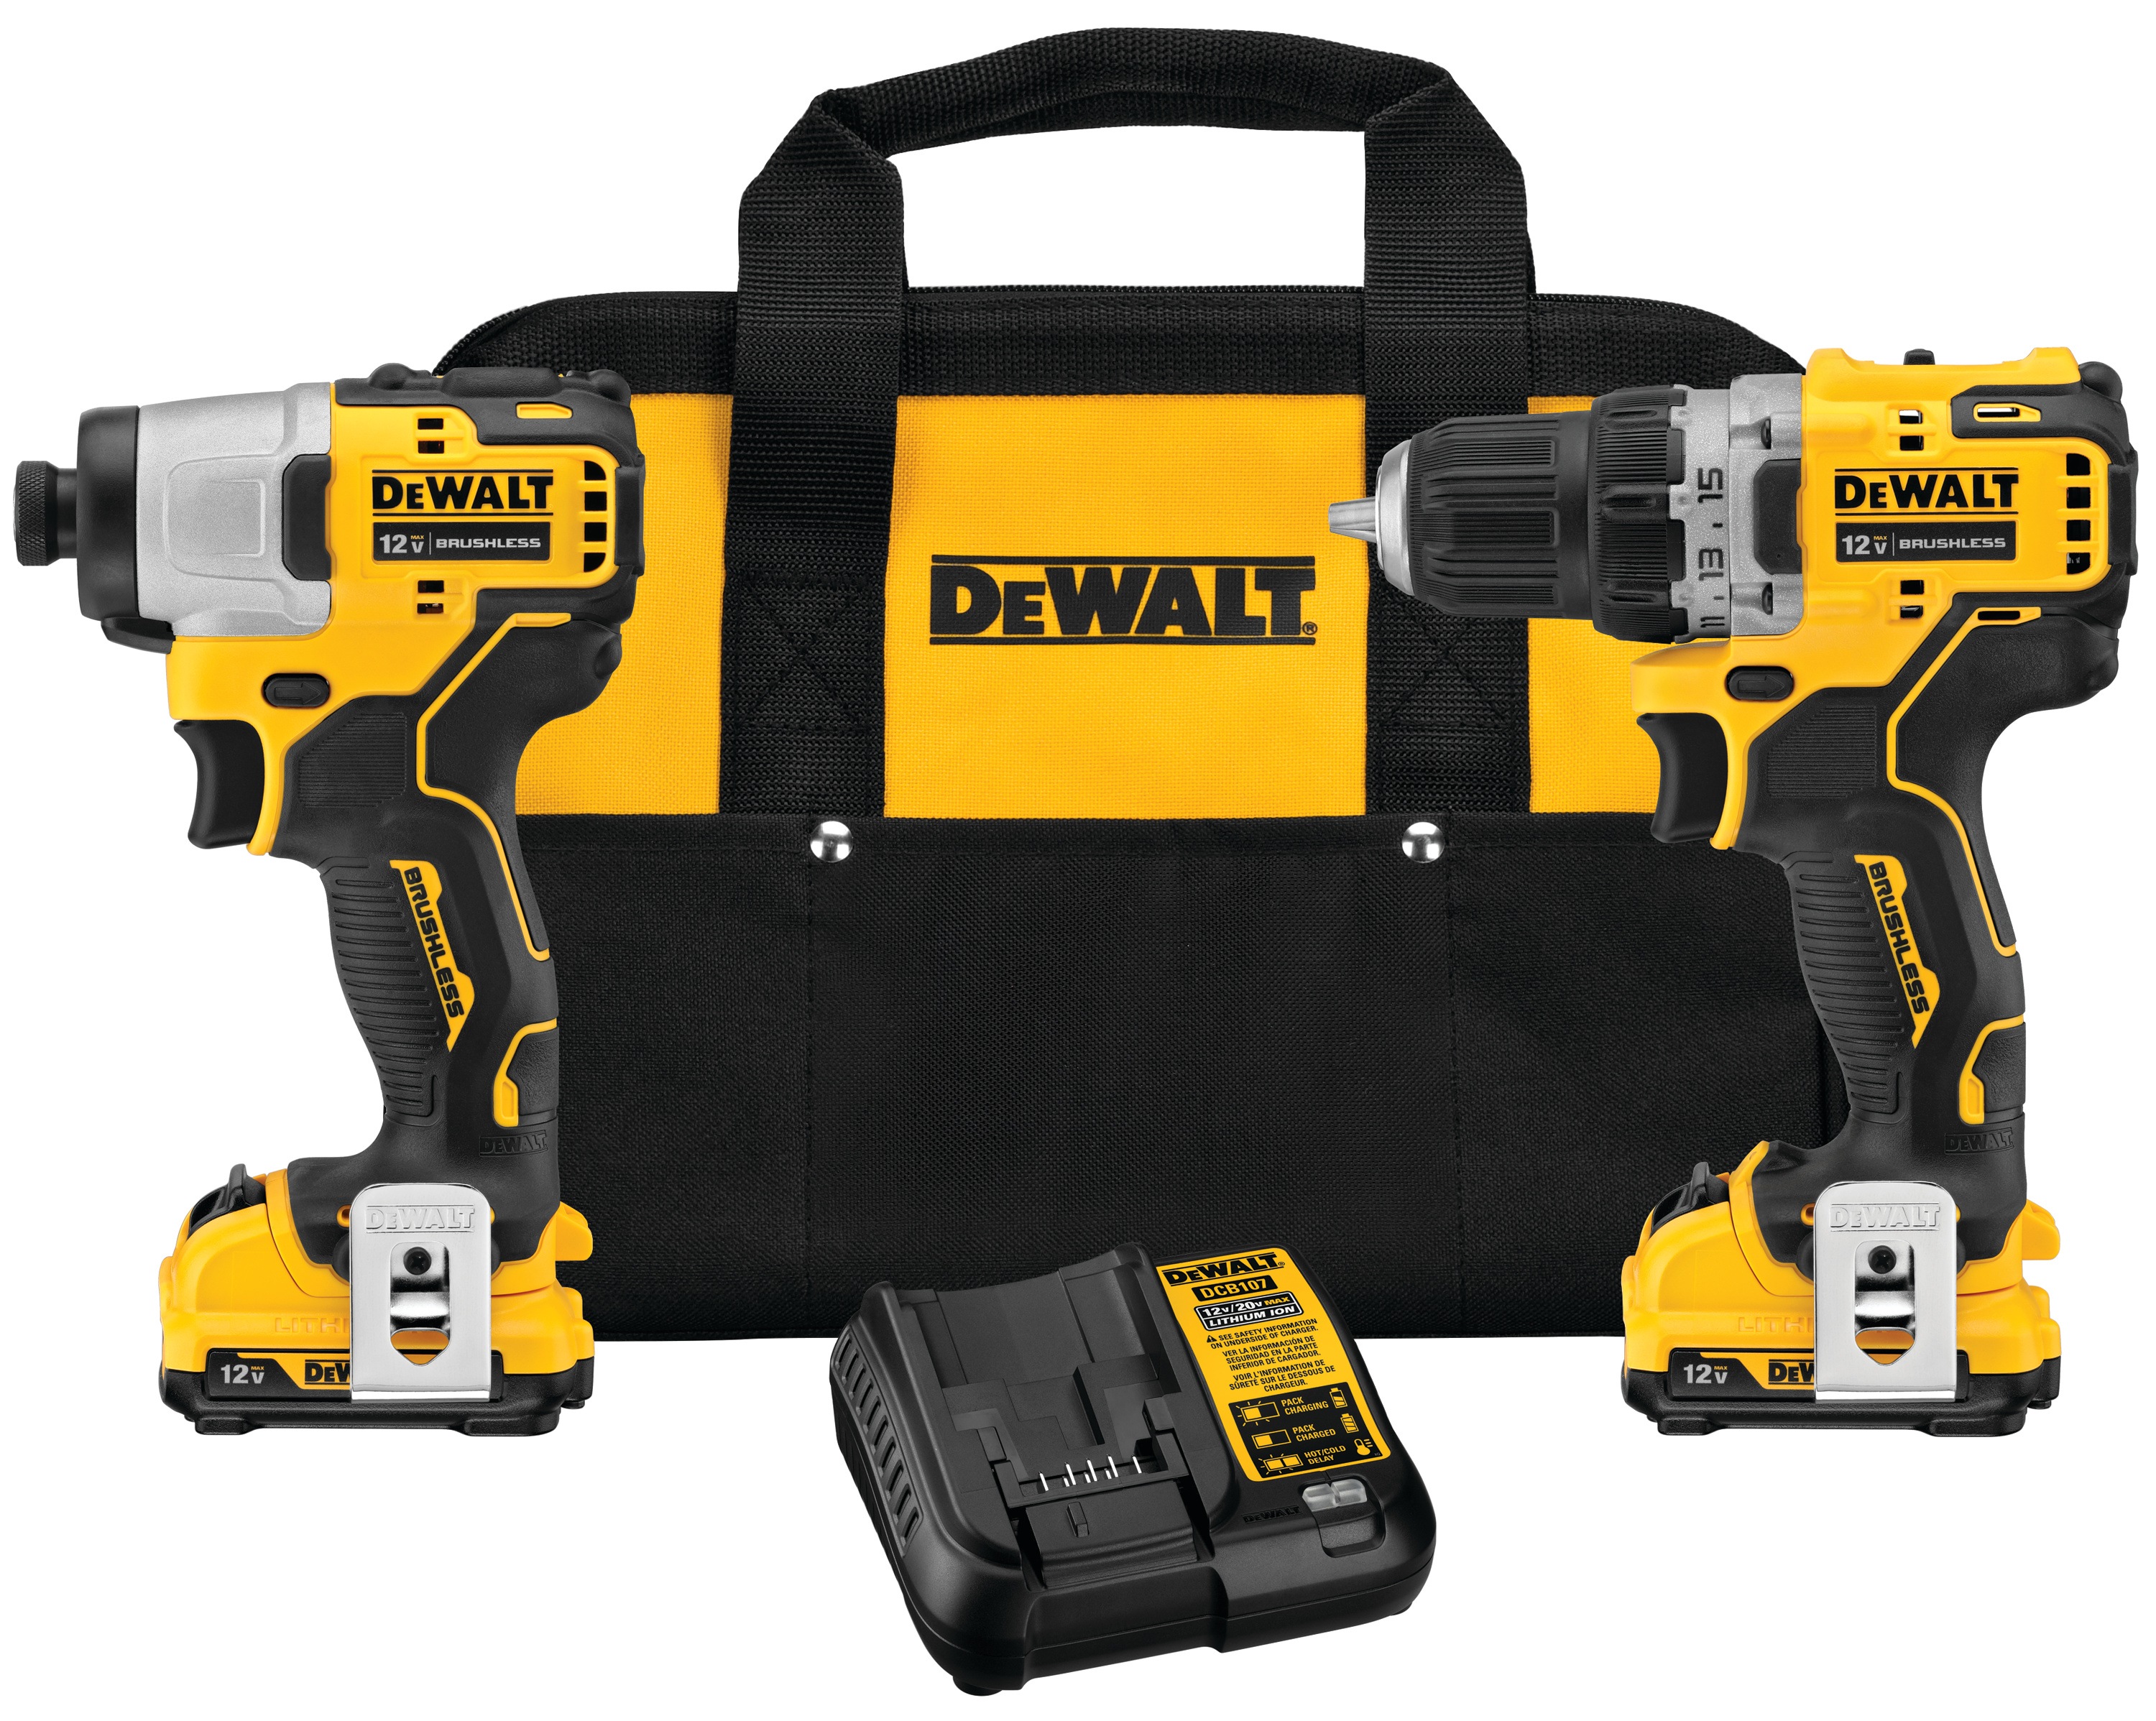 brushless, cordless drill and impact driver combination with its complete kit